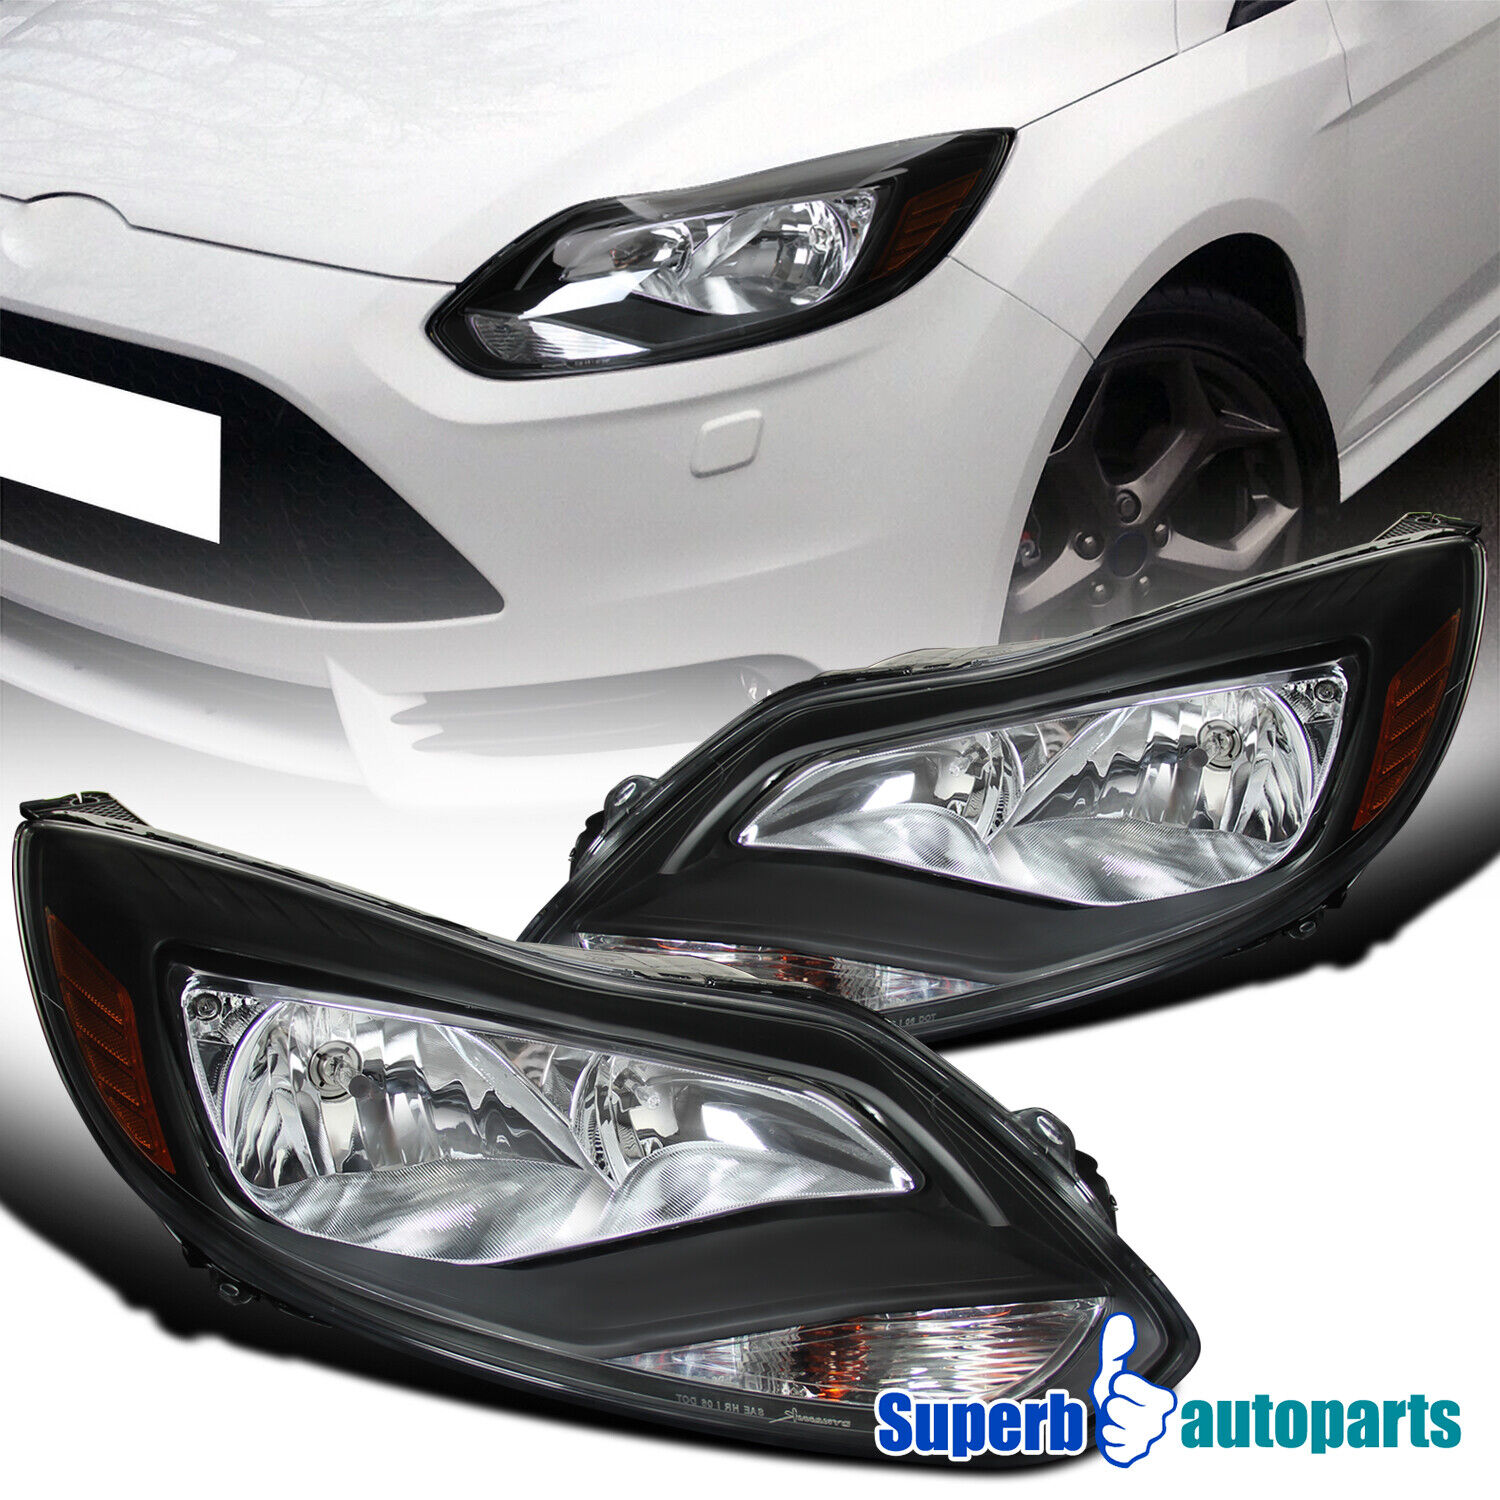 Fits 2012-2014 Ford Focus Headlights Turn Signal Lamps Black Left+Right 12-14